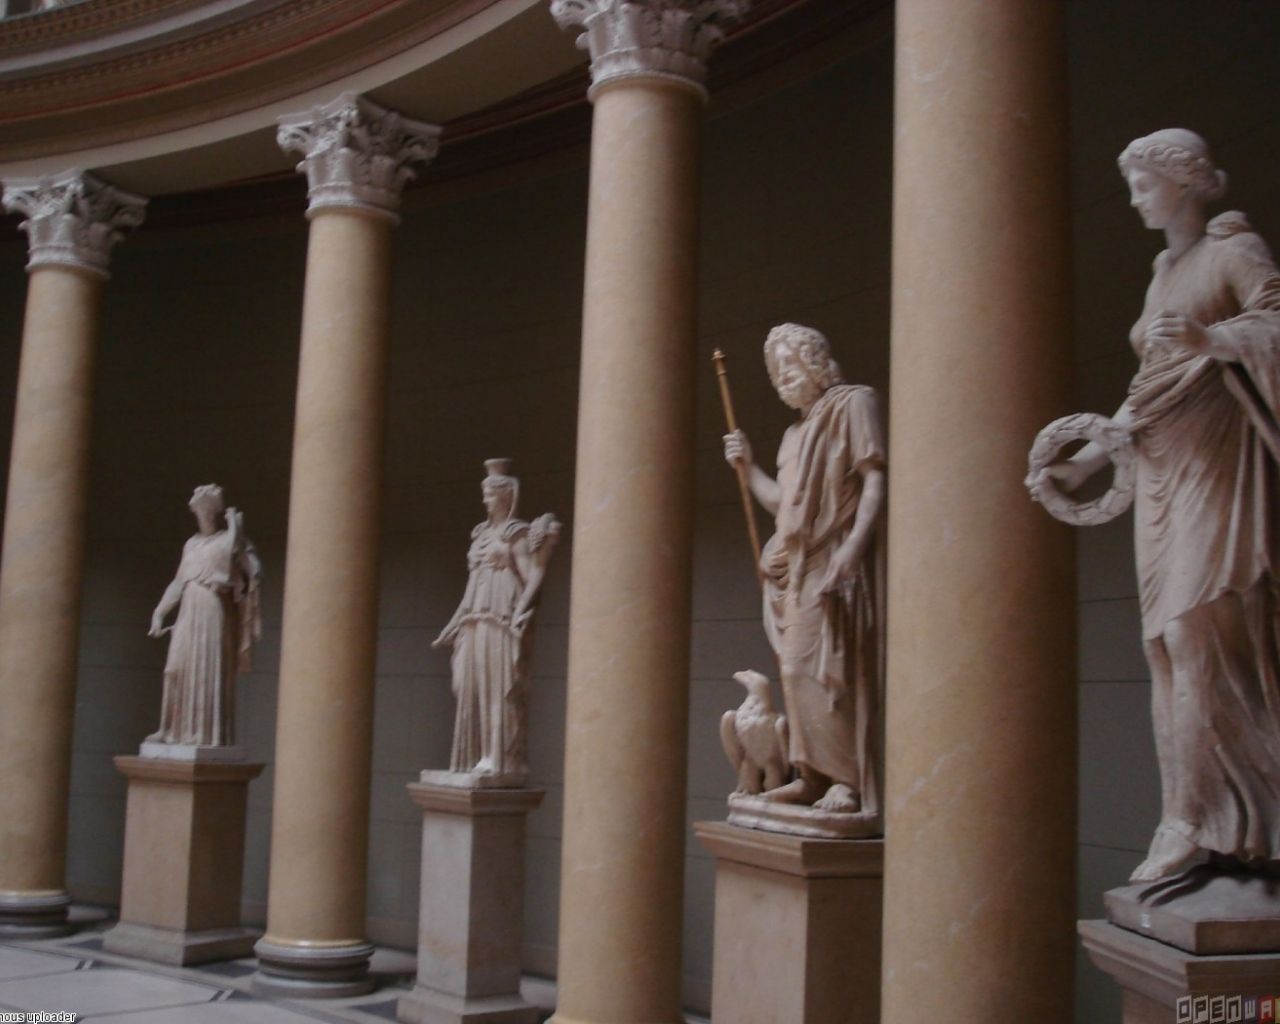 A row of columns with statues of women on top. - Greek statue